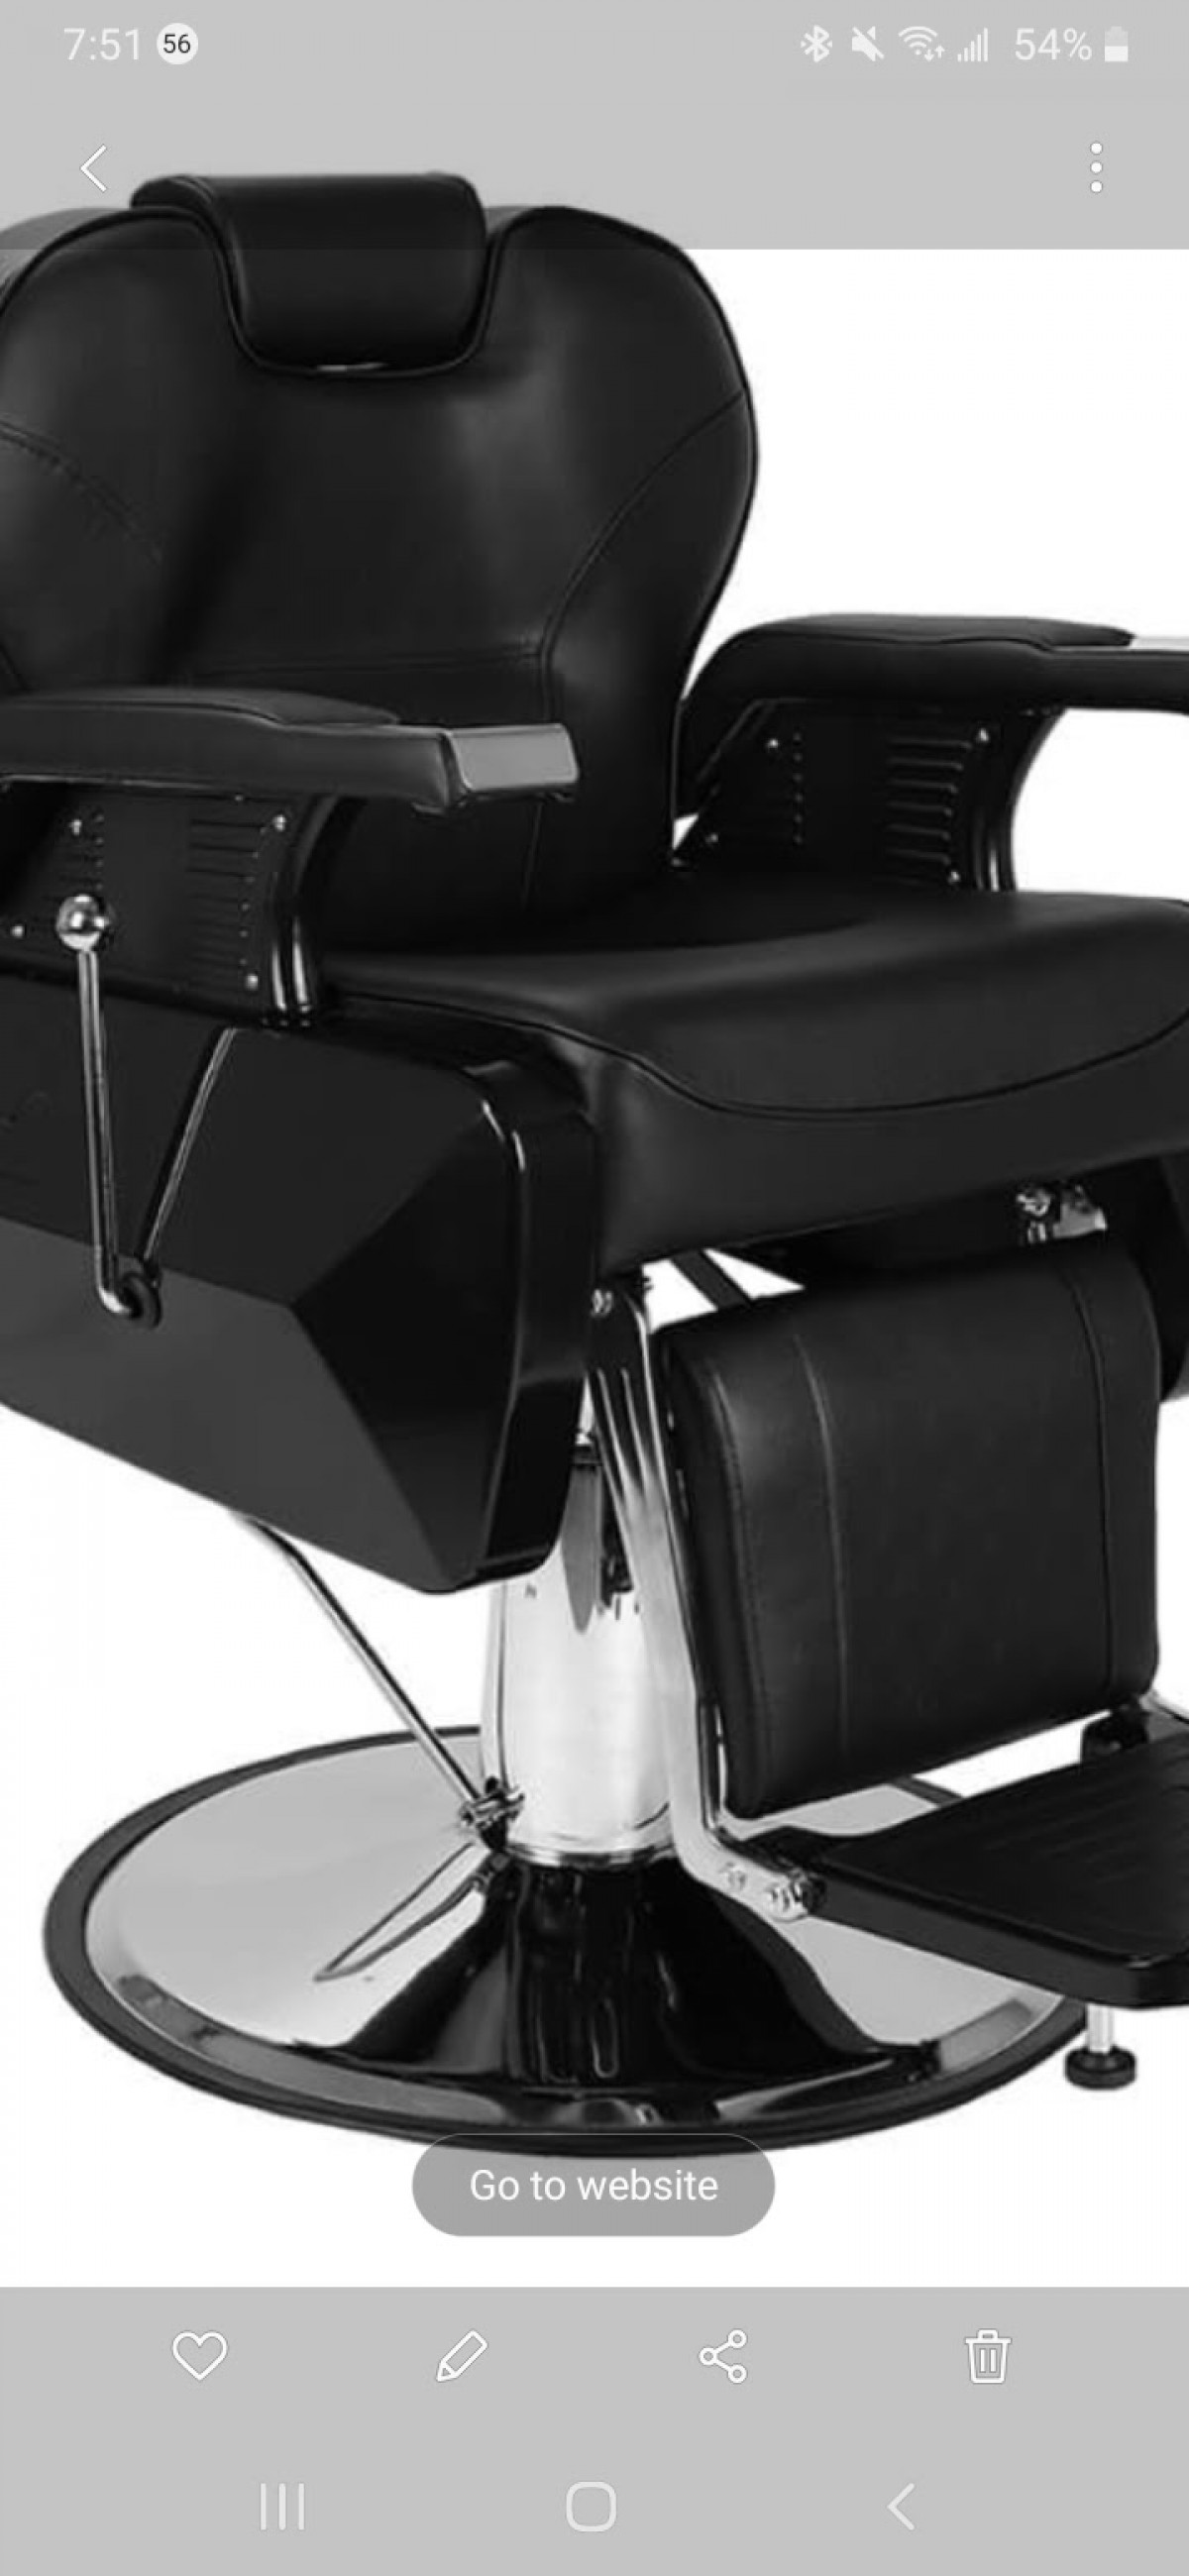 Barber Chair for sale in Grange Hill Westmoreland - Furniture